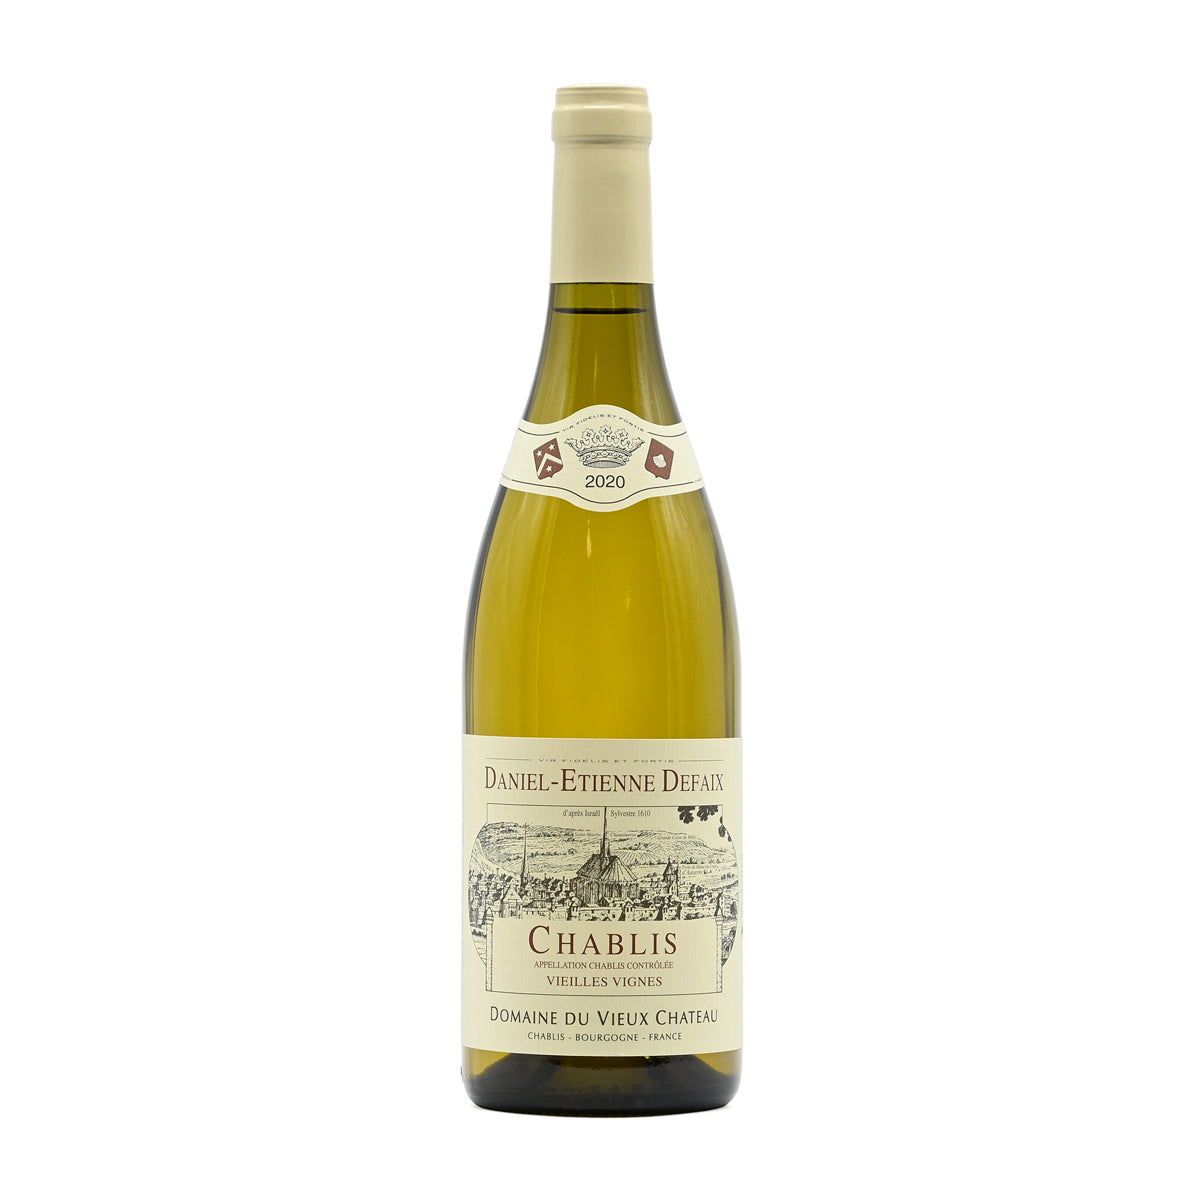 Domaine Daniel-Etienne Defaix Chablis Vieilles Vignes 2020, 750ml French white wine, made from Chardonnay, from Chablis, Burgundy, France – GDV Fine Wines, Hong Kong